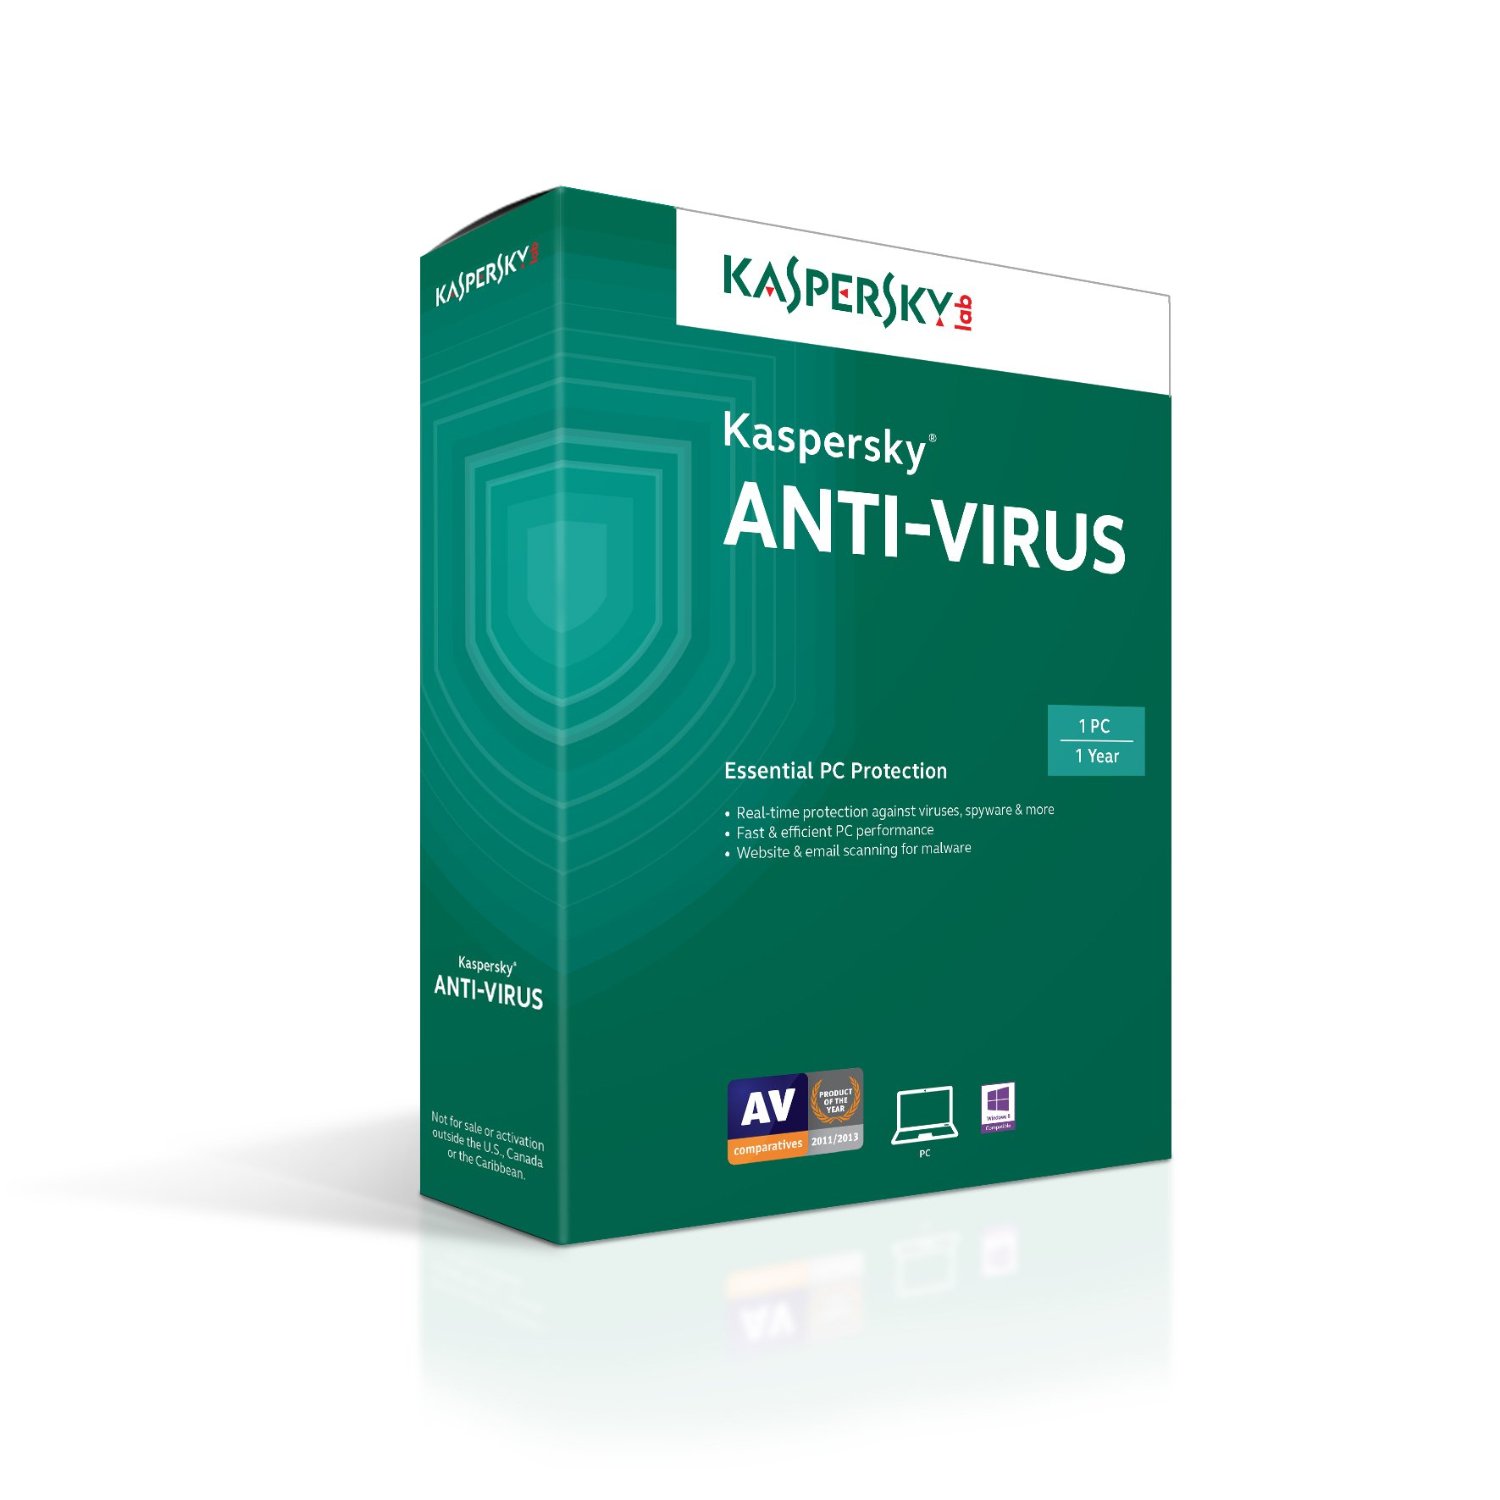 kaspersky internet security 2016 for mac review